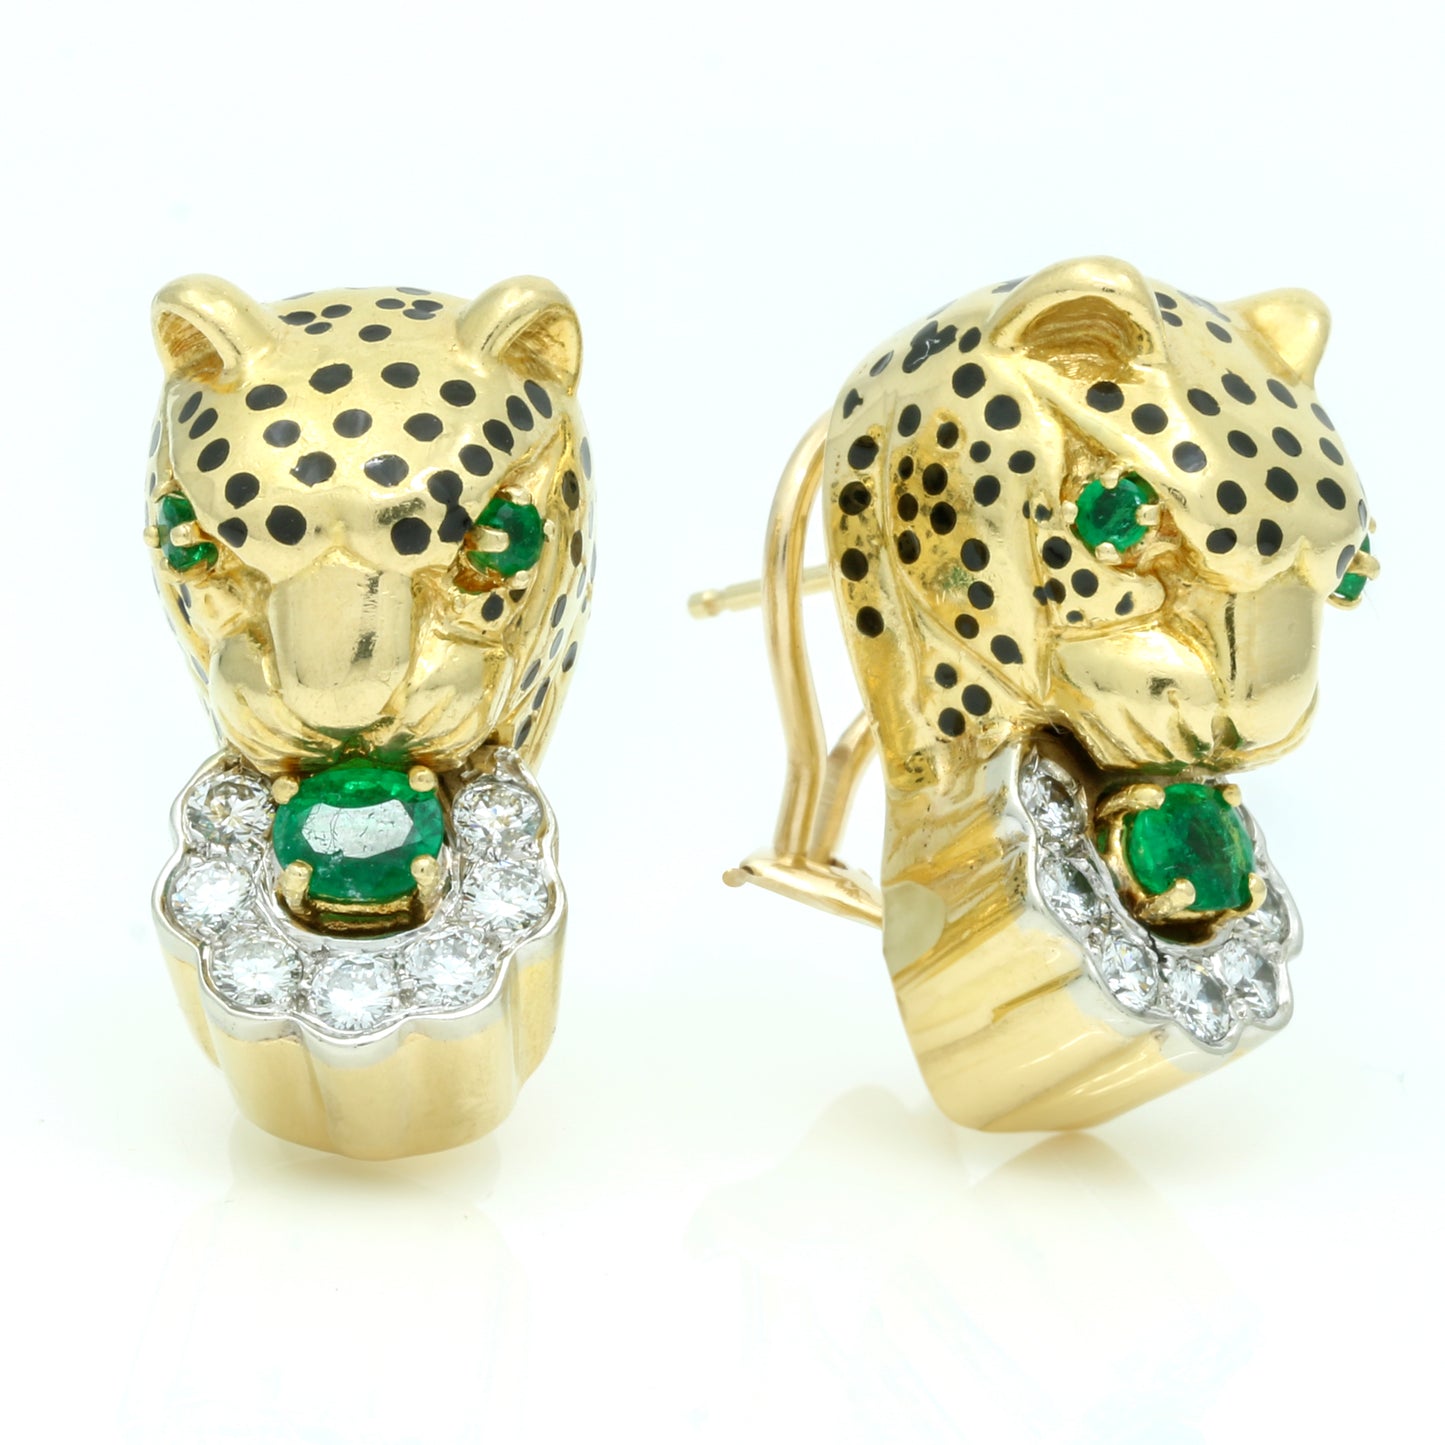 Emis Beros 18K Yellow Gold Panther Earrings with Emeralds, Diamonds, and Enamel